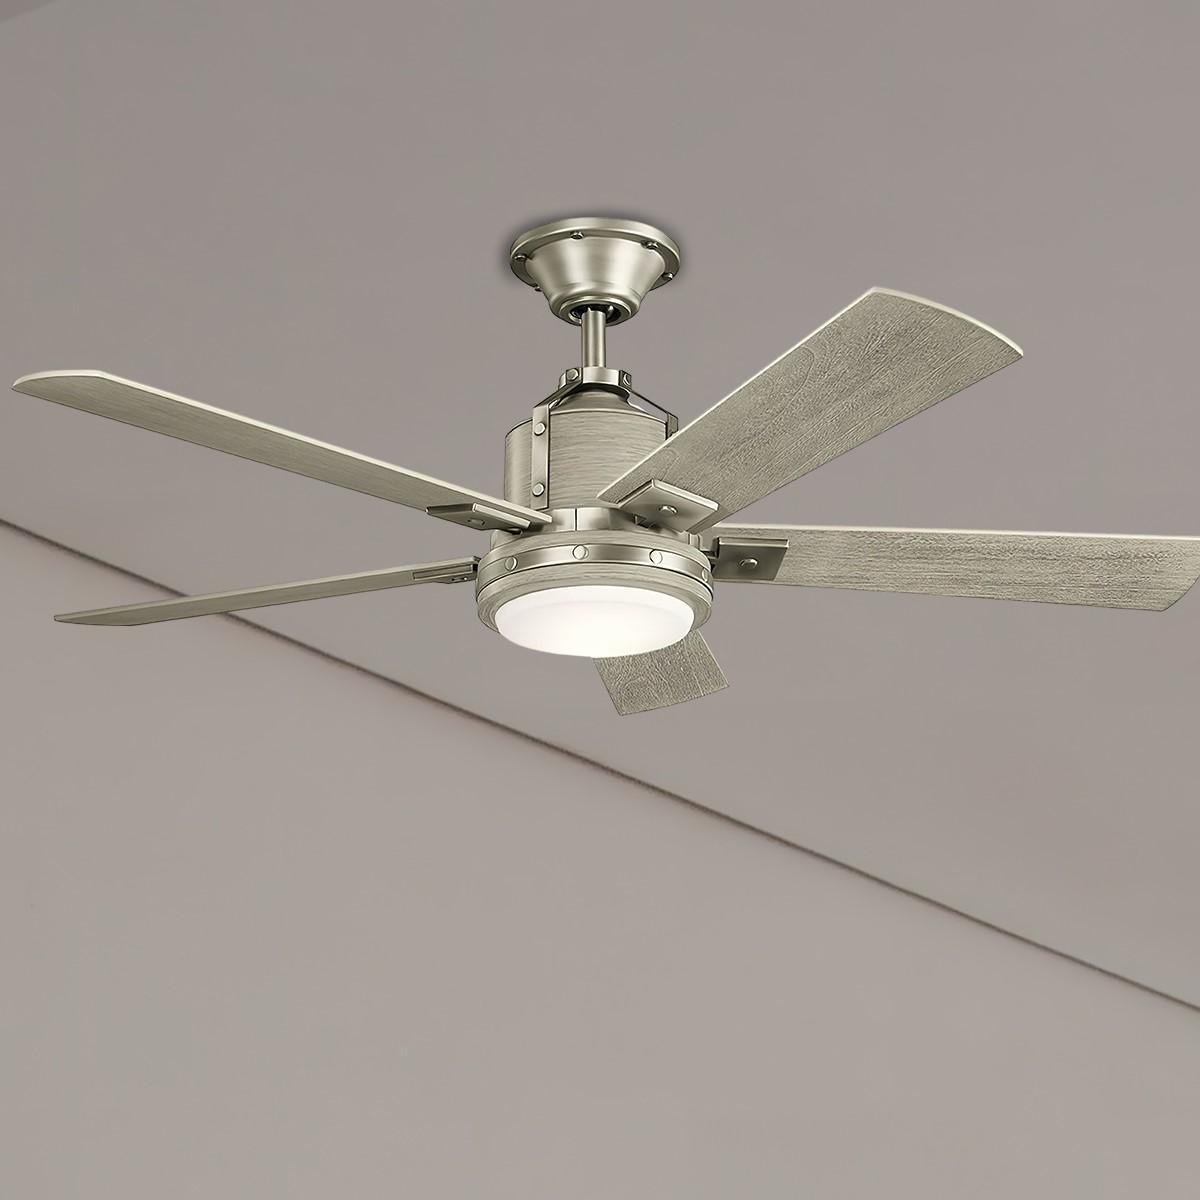 Colerne 52 Inch Rustic Ceiling Fan With Light, Wall Control Included